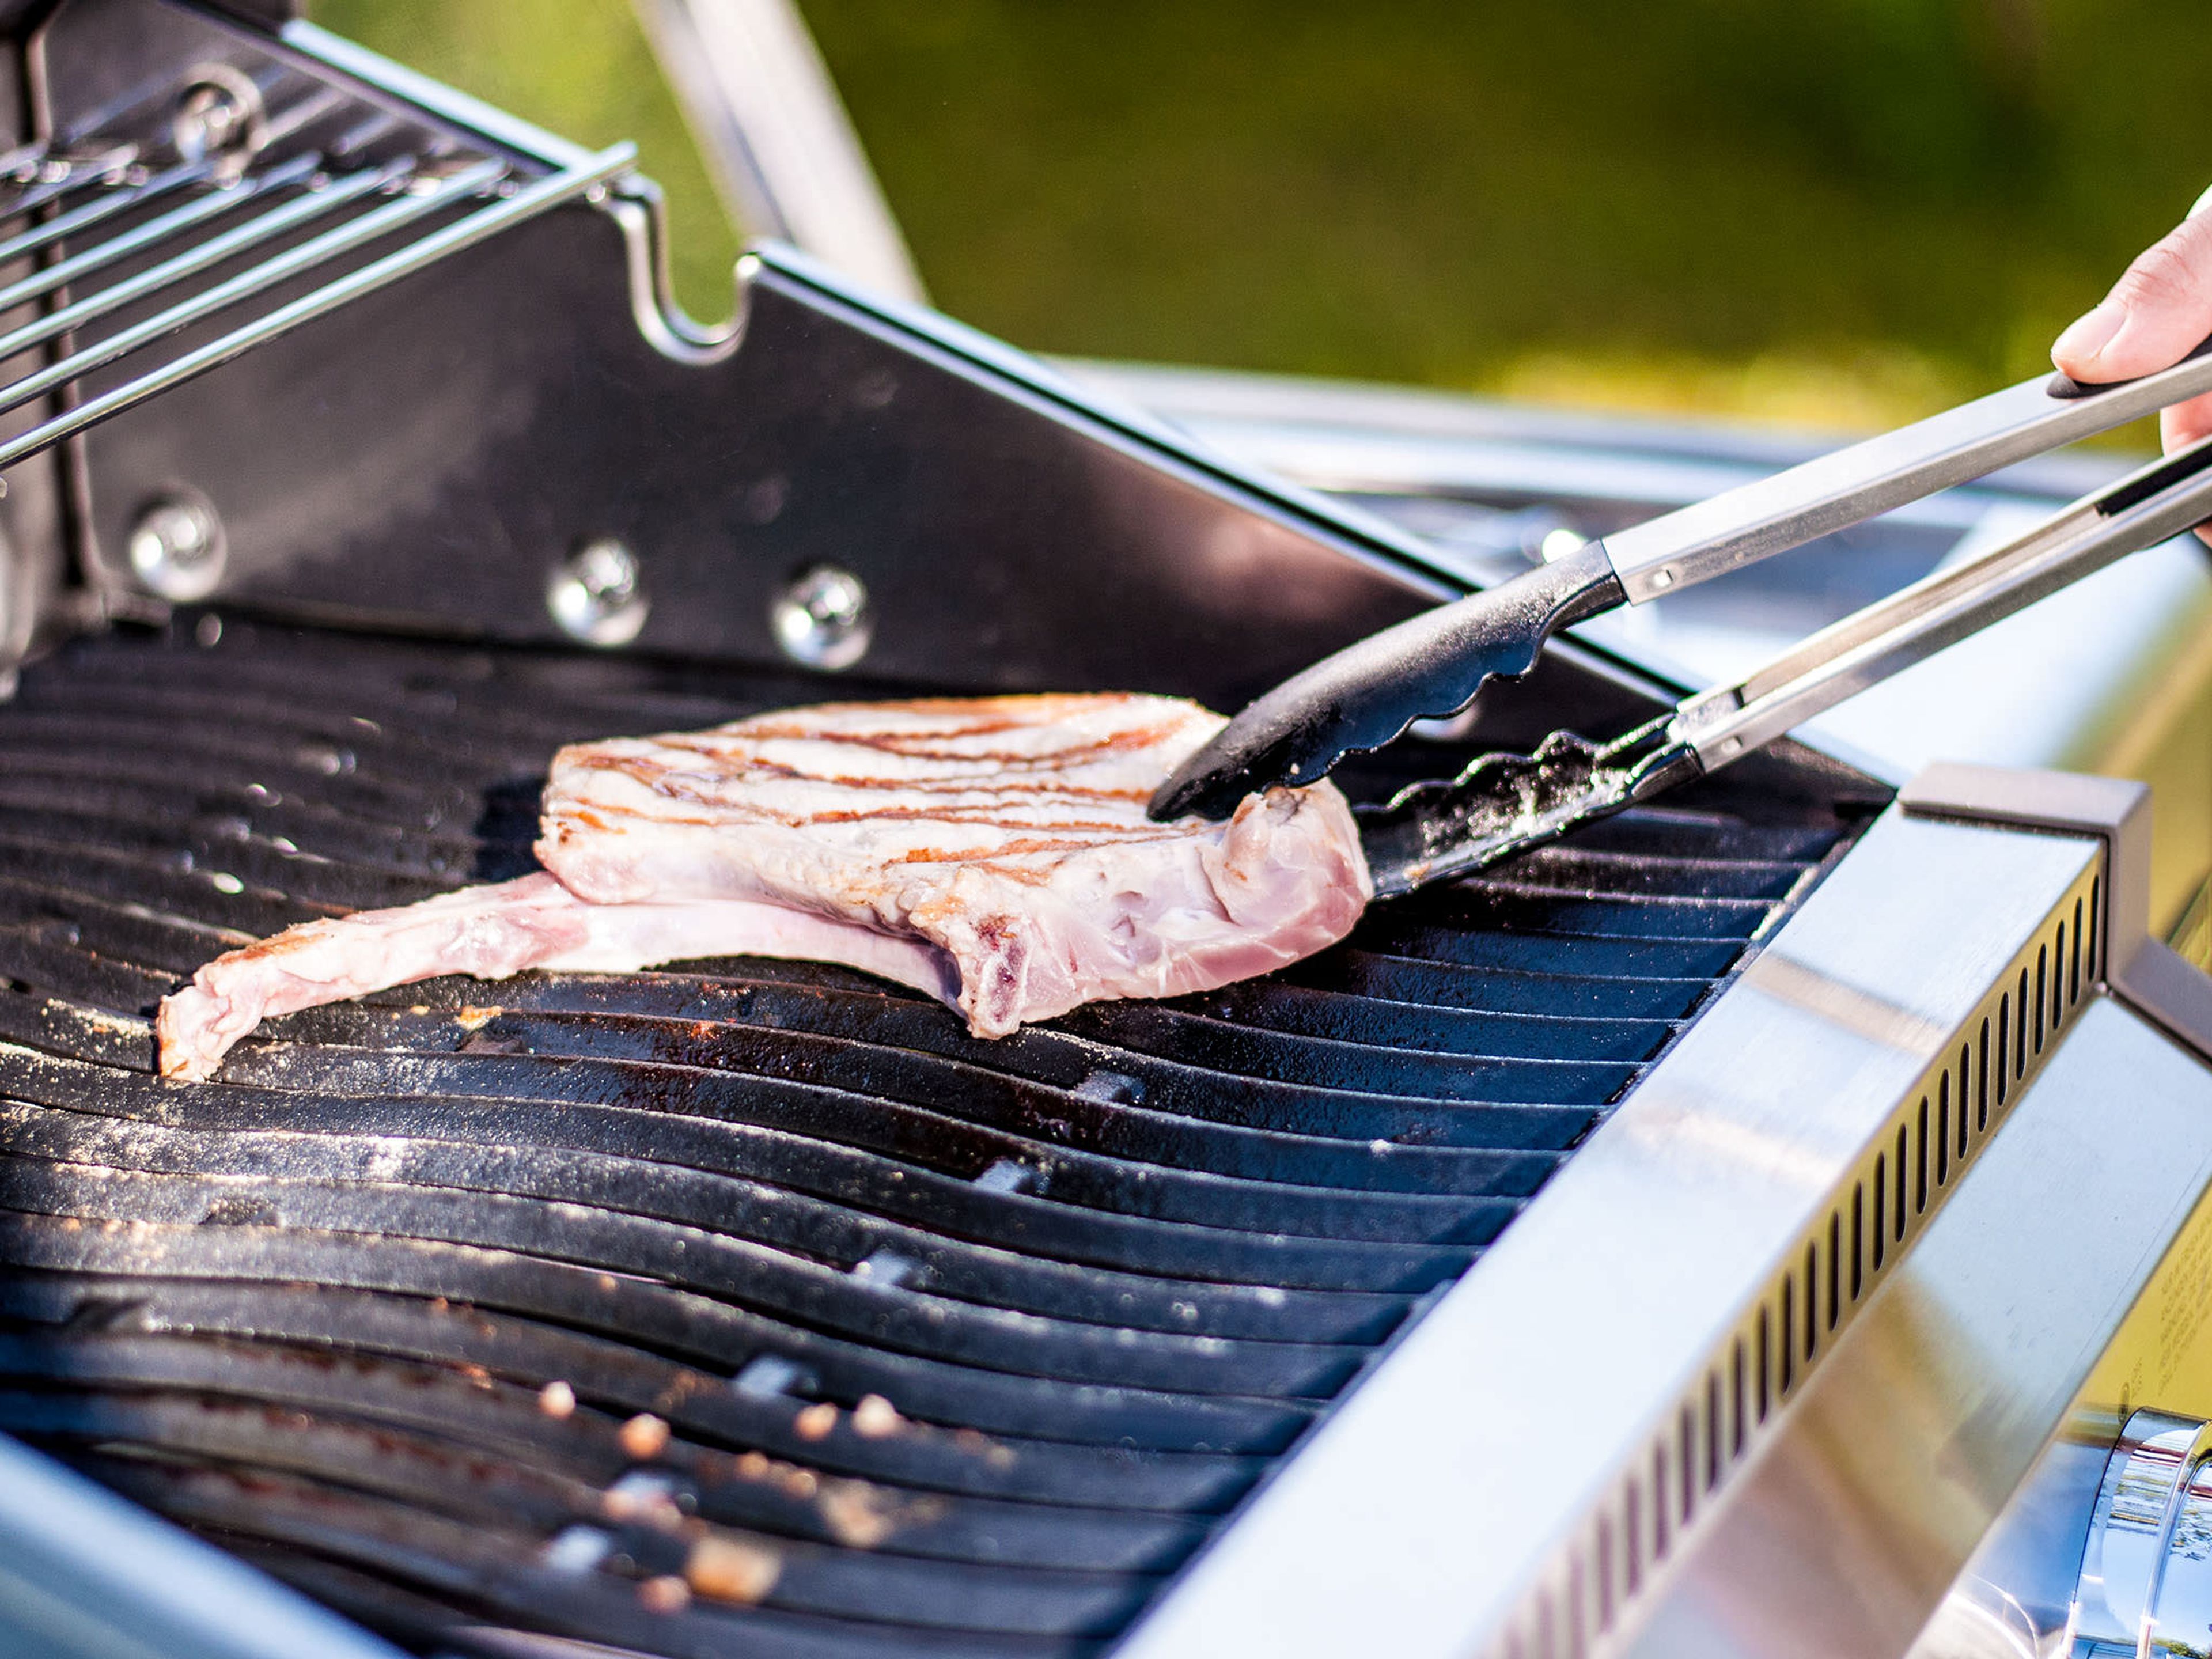 Sear pork chops for approx. 2 – 3 min. on each side on the hot grill.